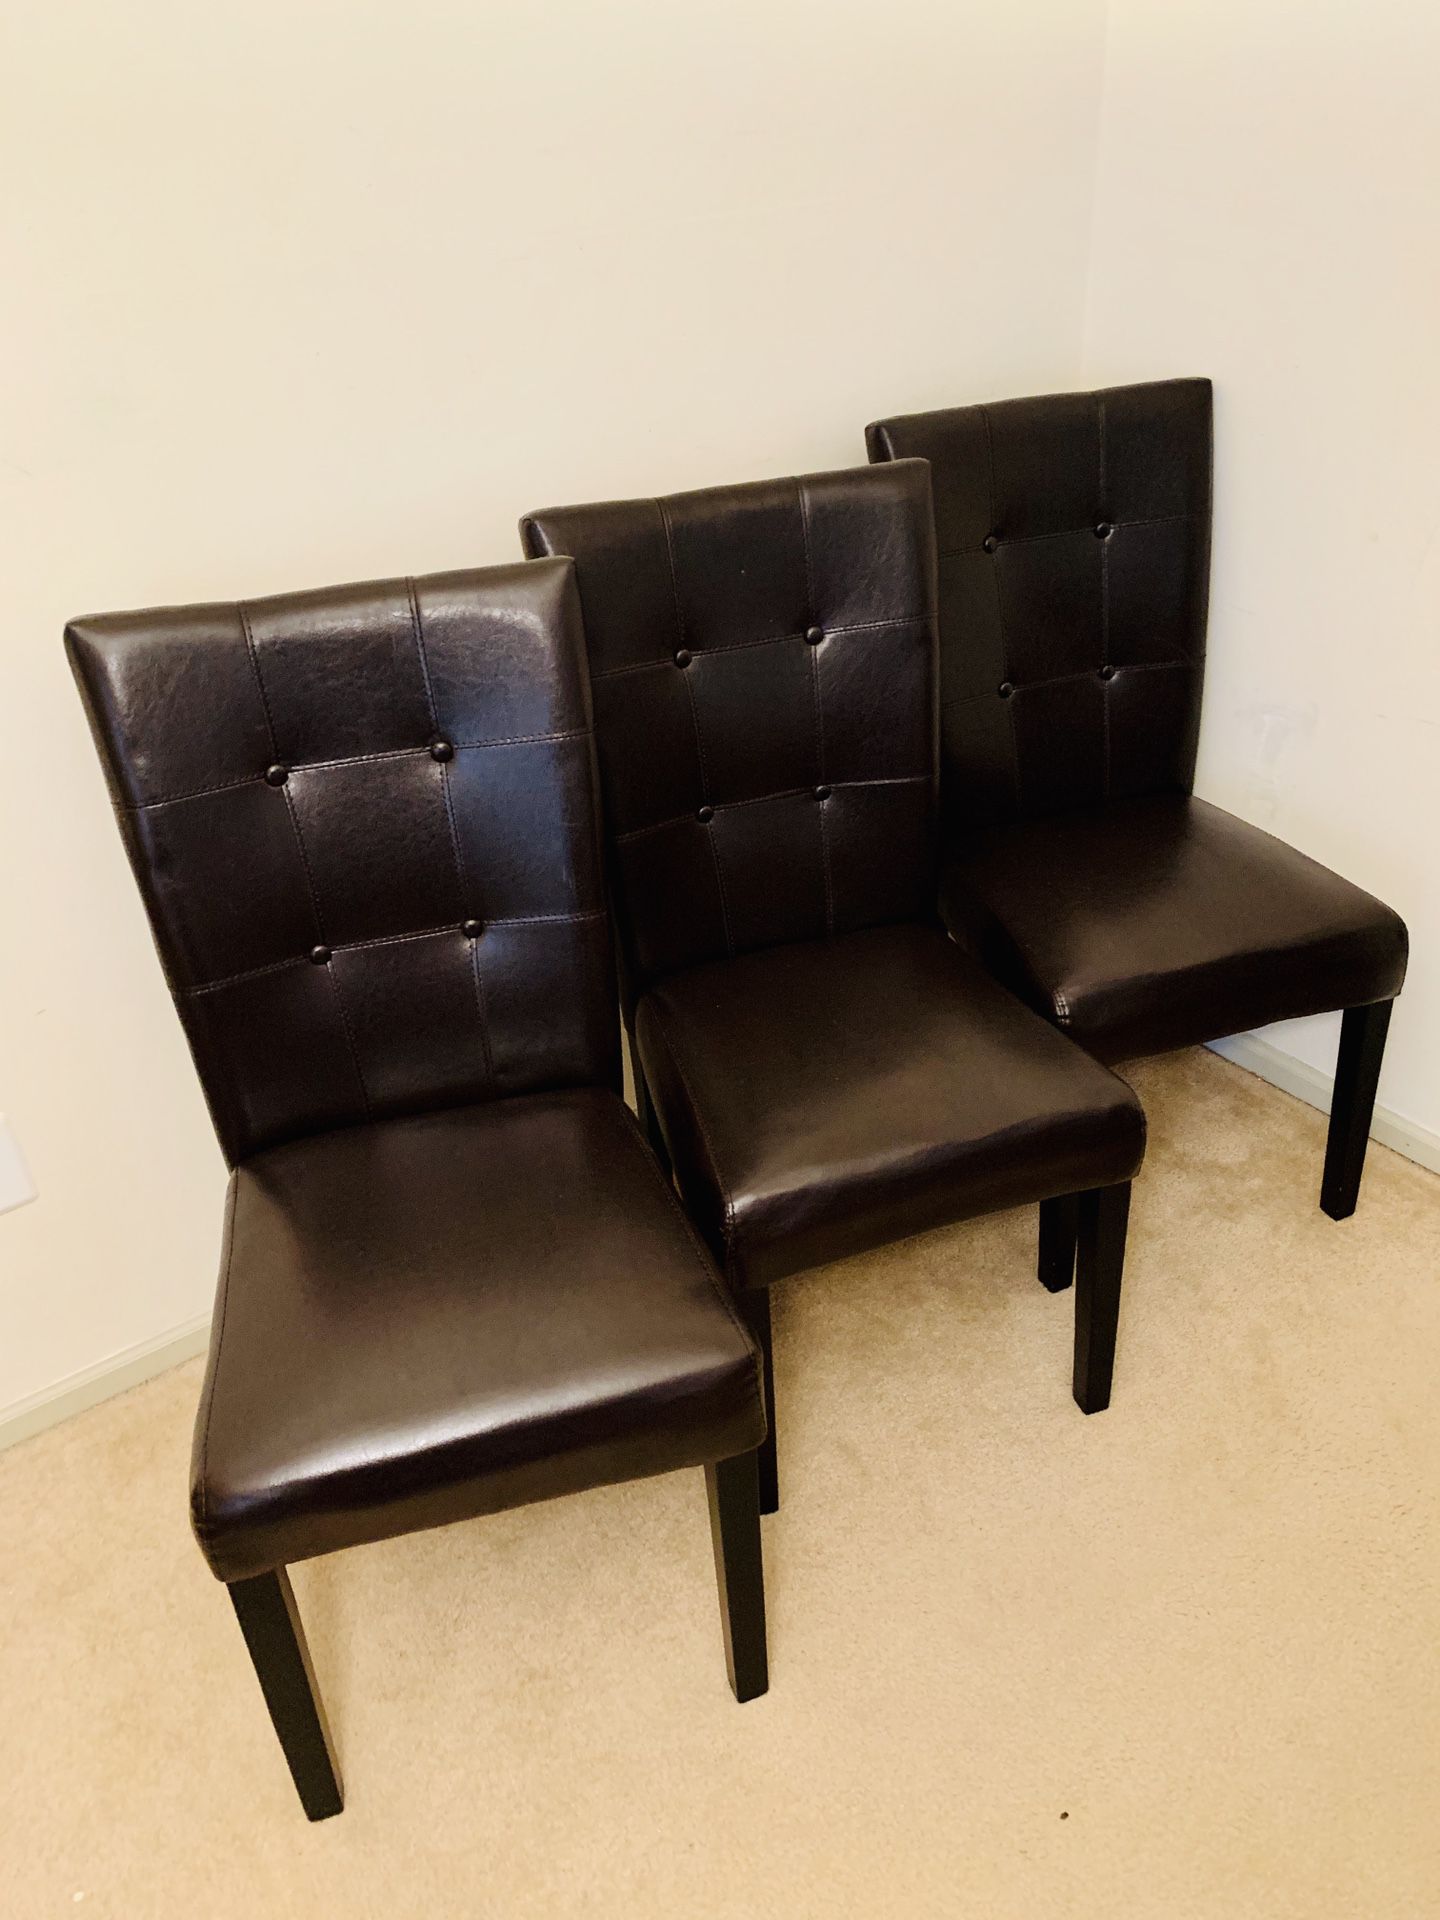 Set of 3 Ashley Furniture Leather Dining Room Chairs